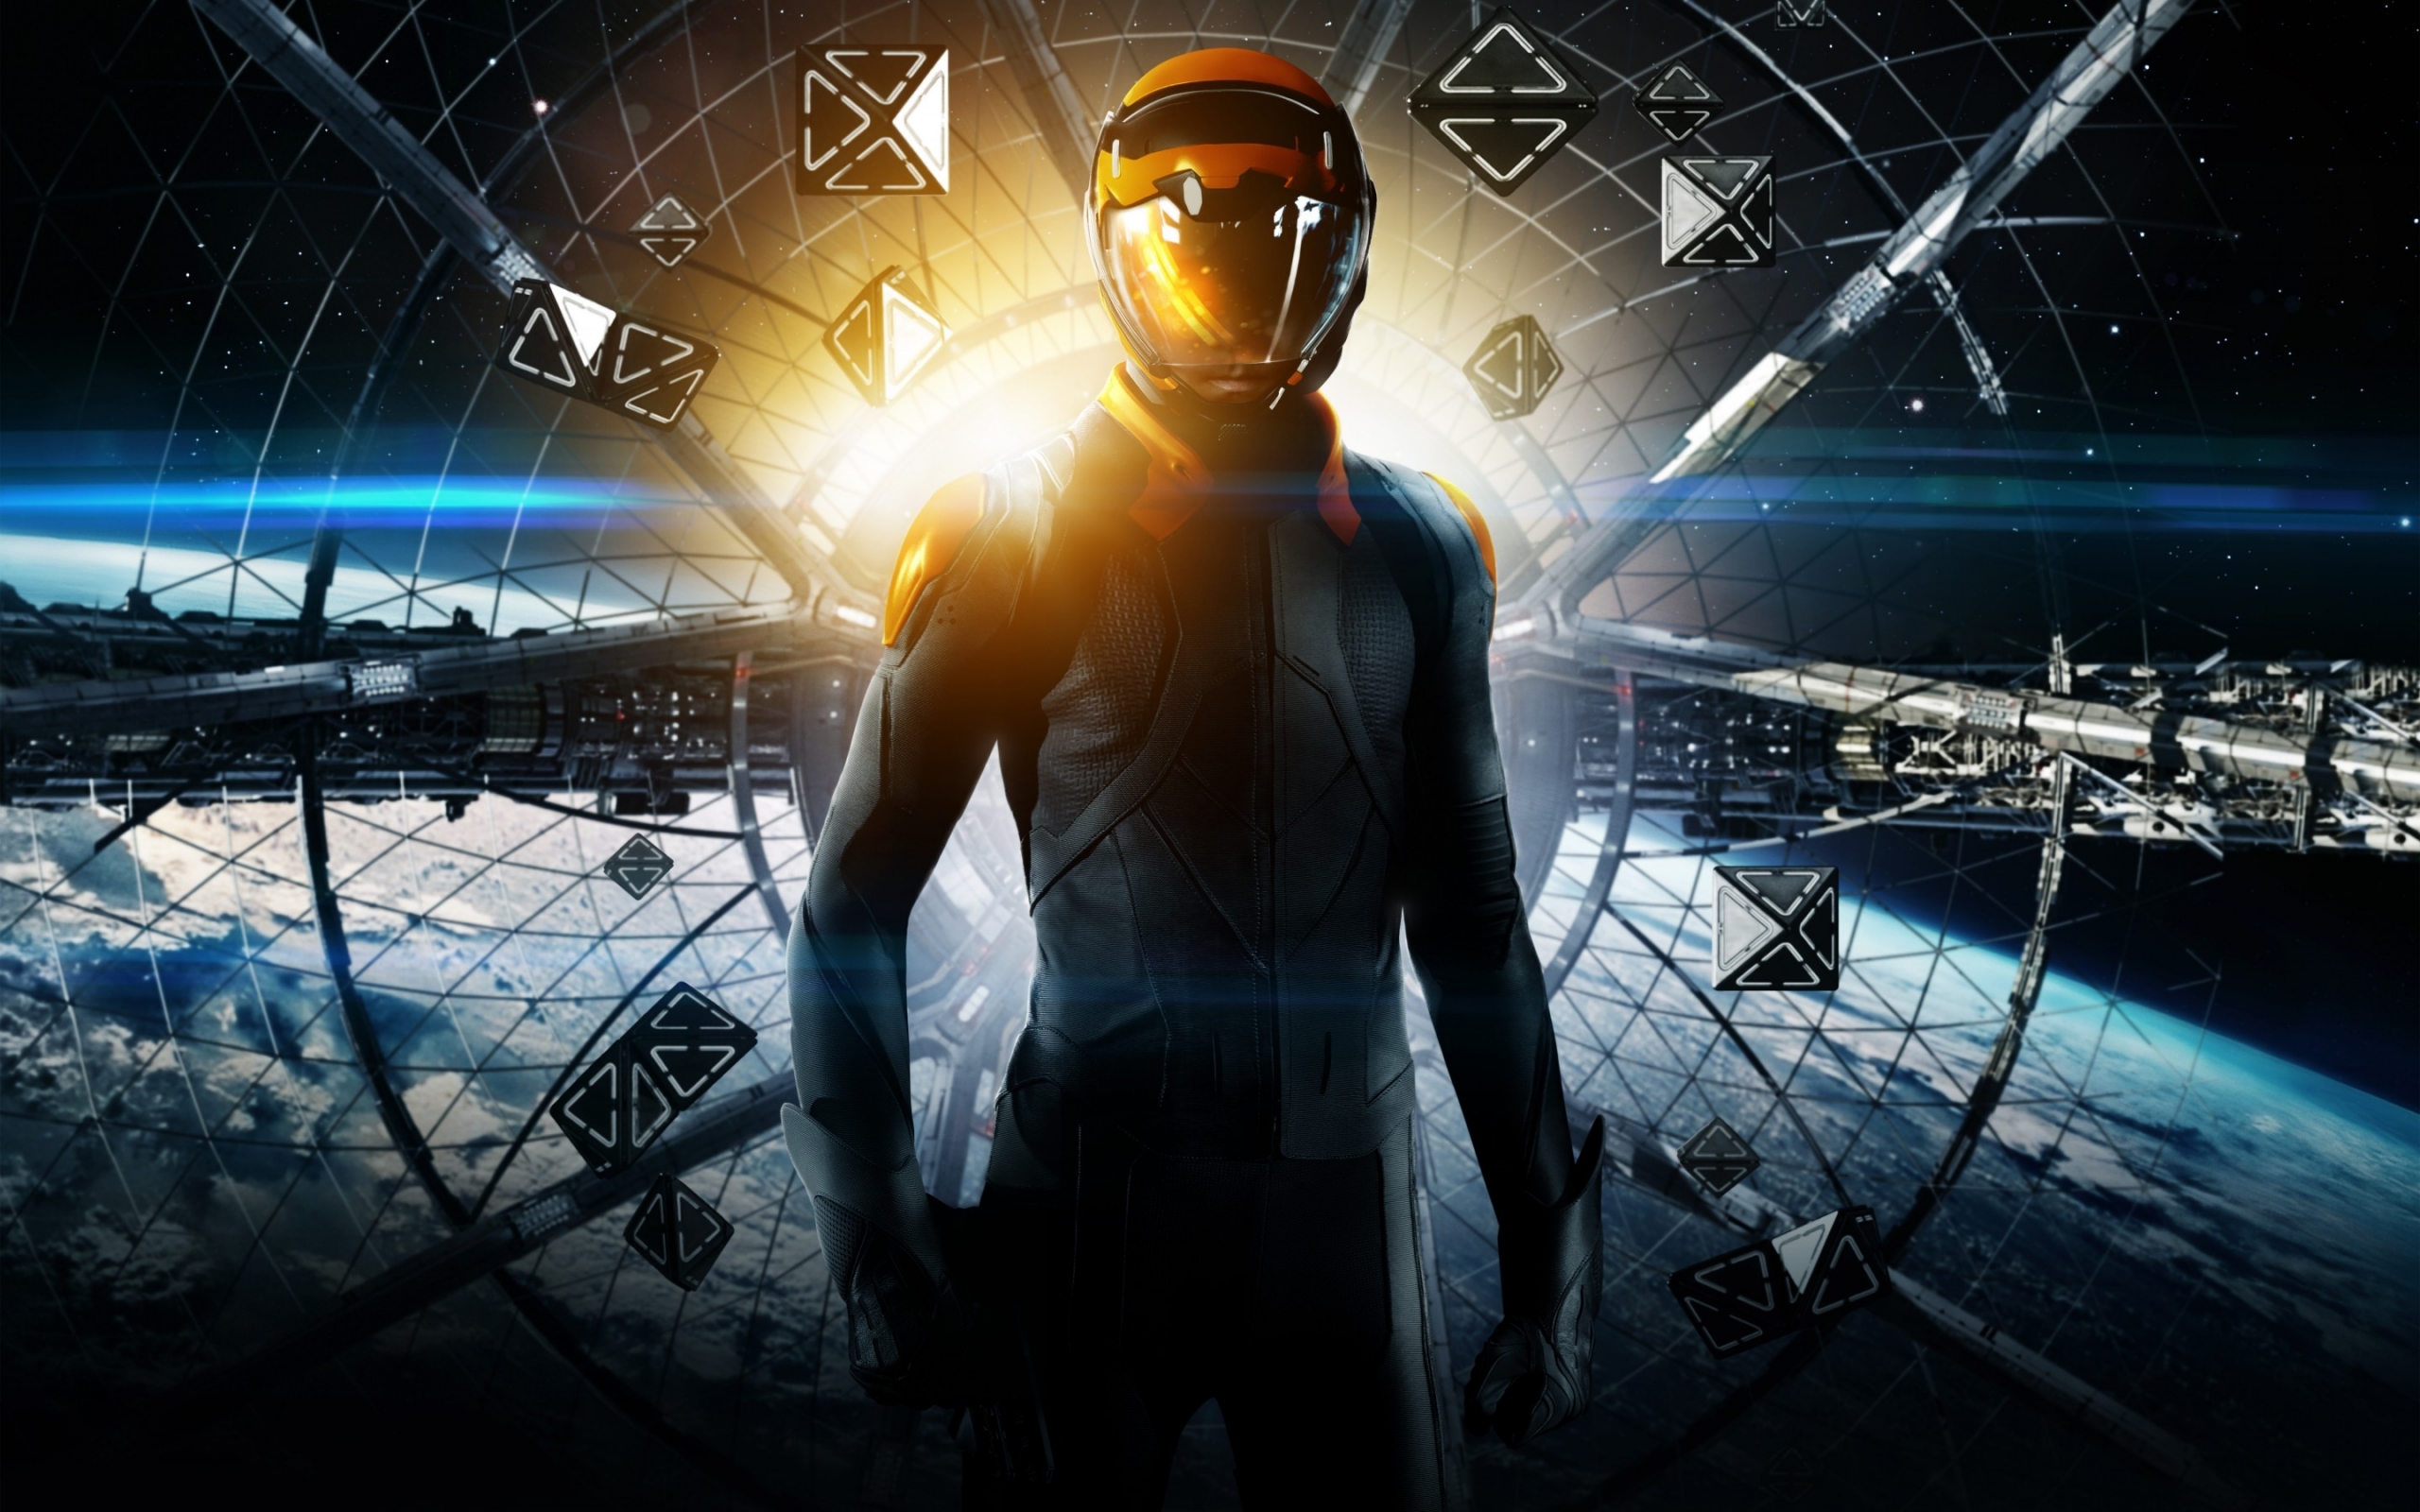 Ender's Game Poster for 2560 x 1600 widescreen resolution